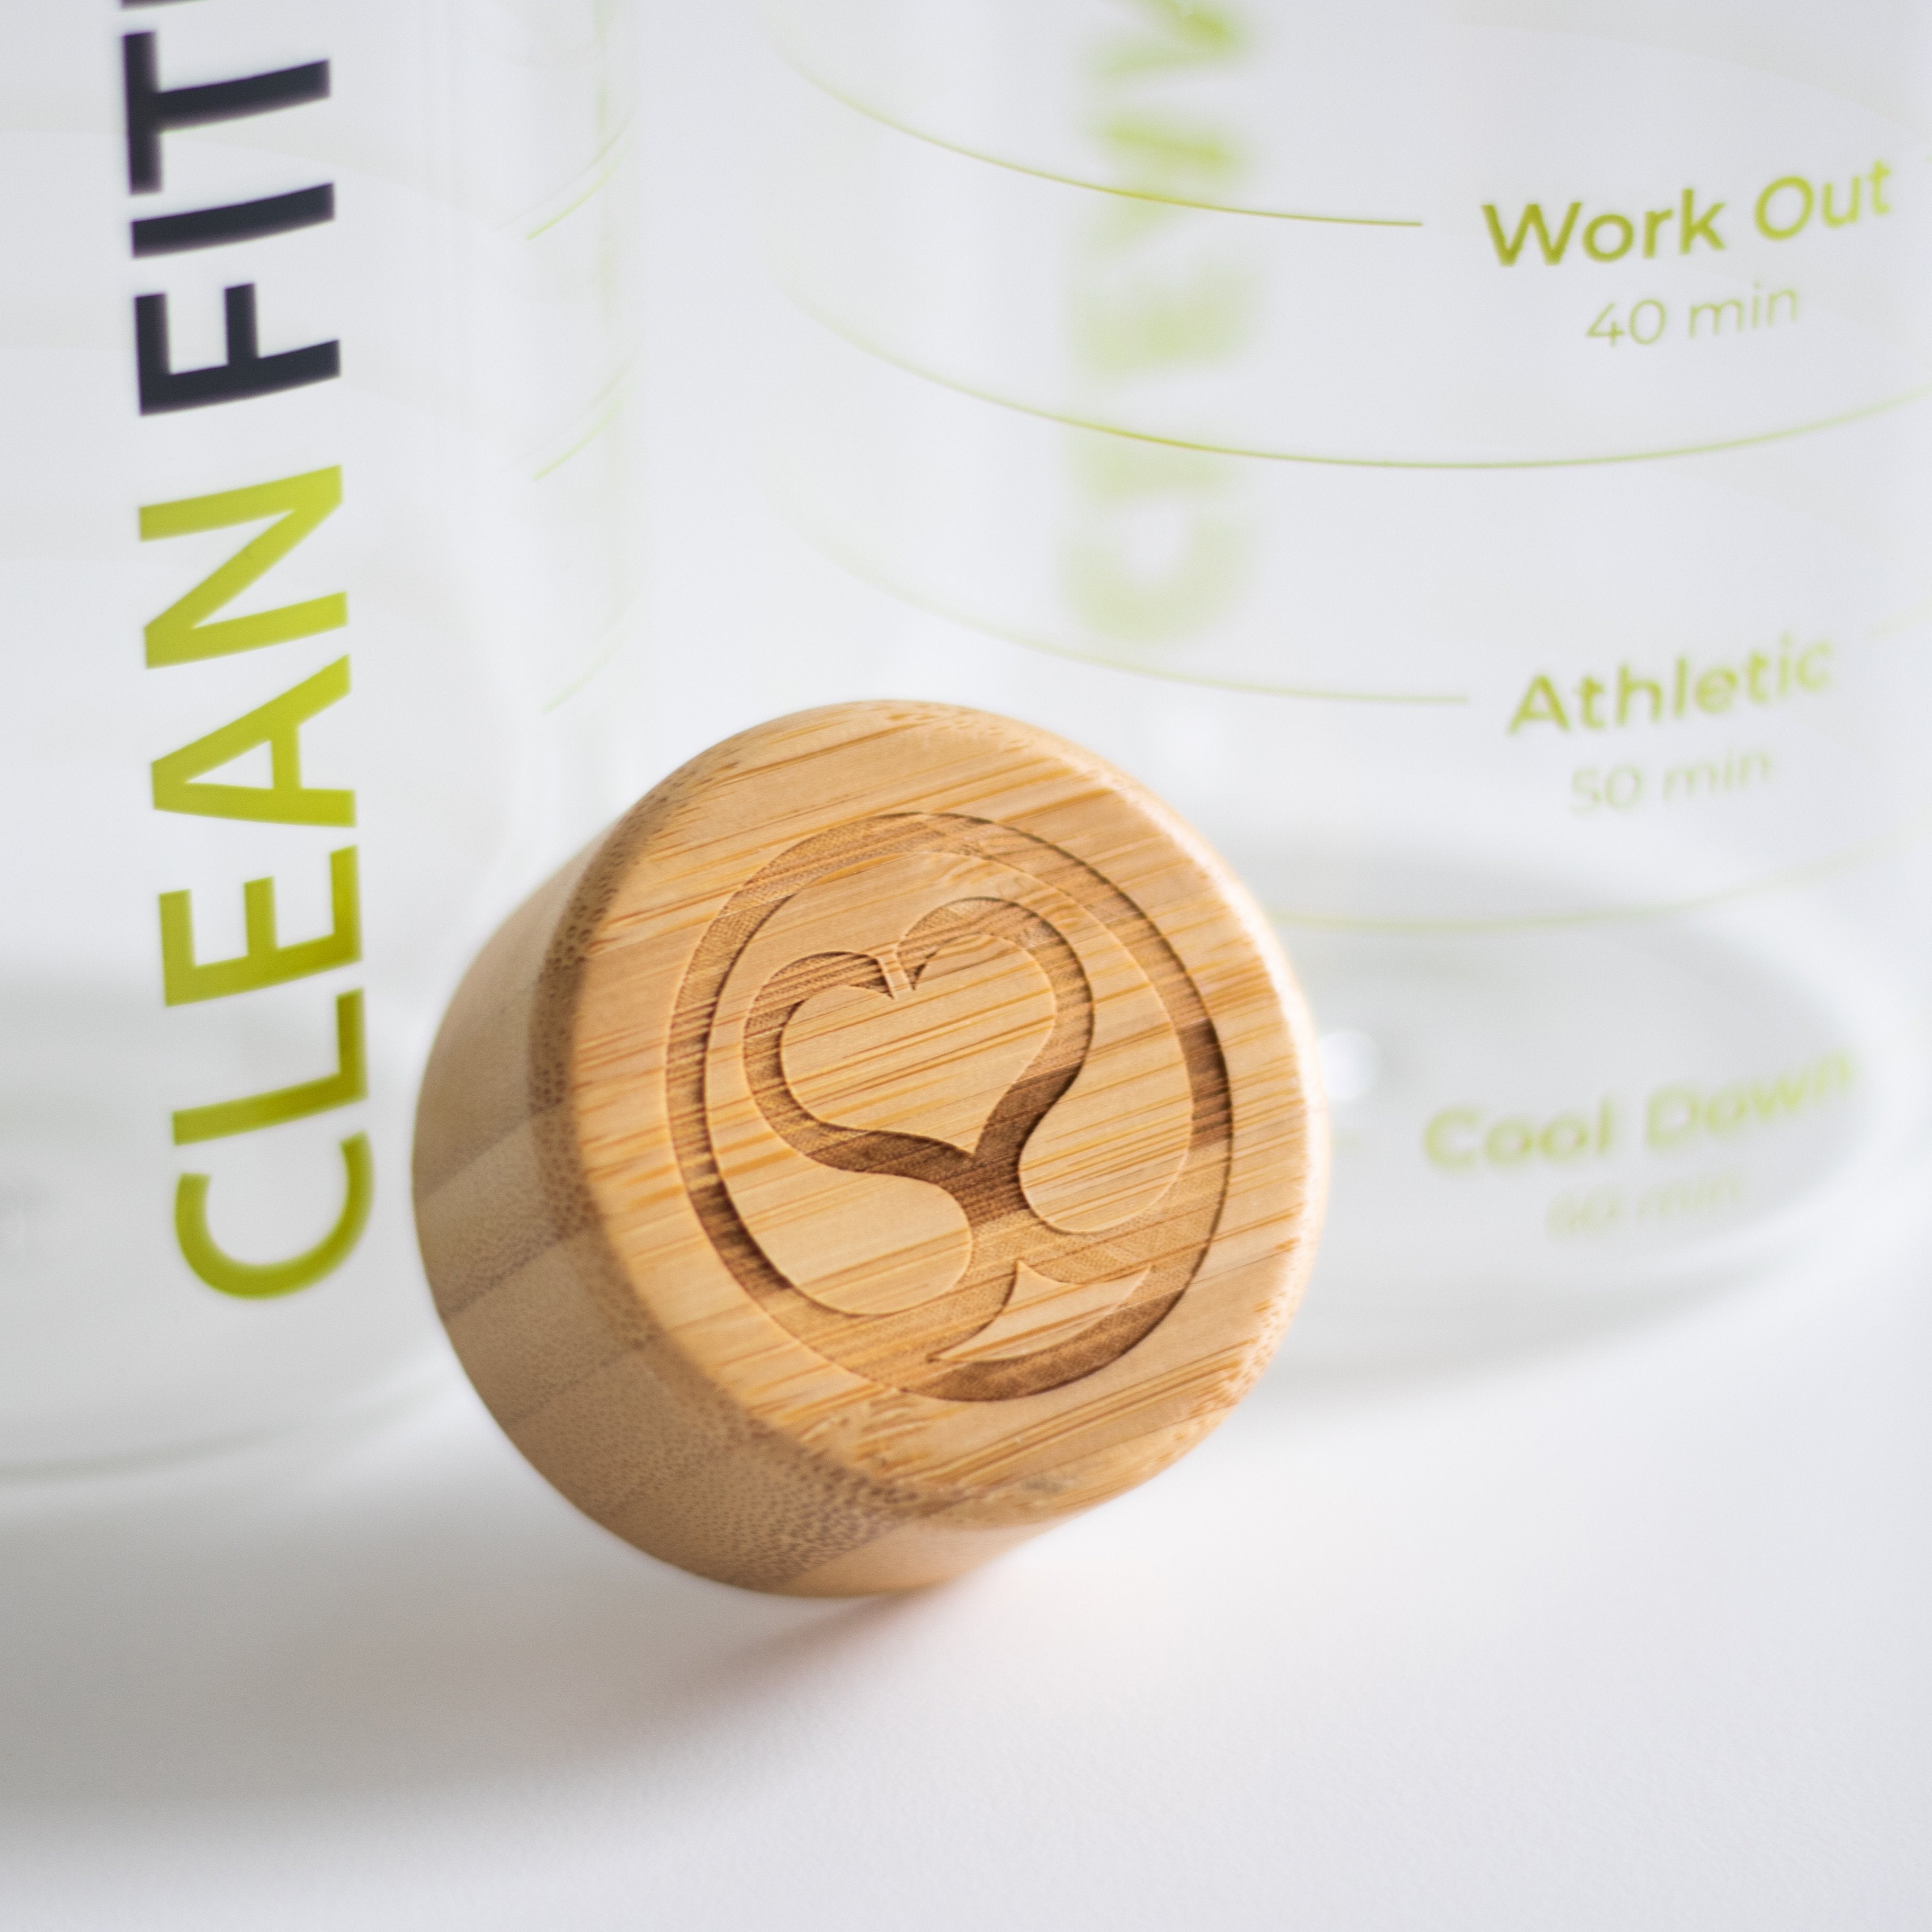 CLEAN FITNESS Trinkflasche